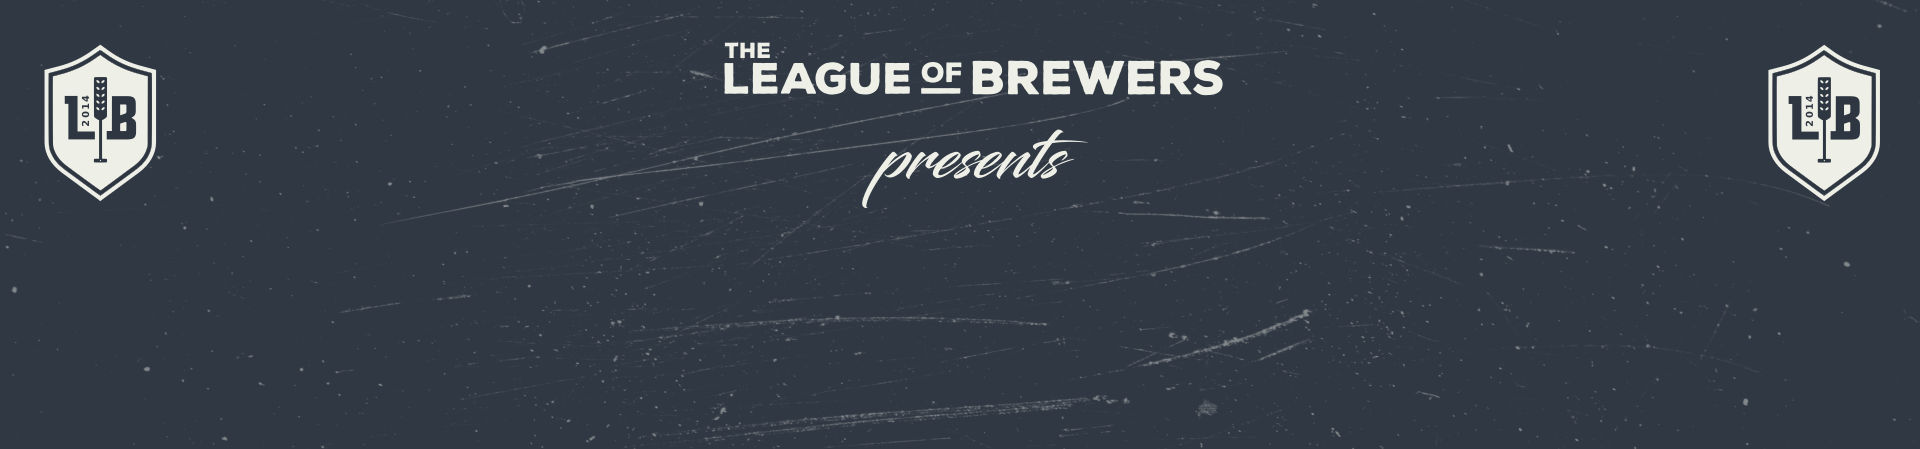 League of Brewers presents: All Grain Kits